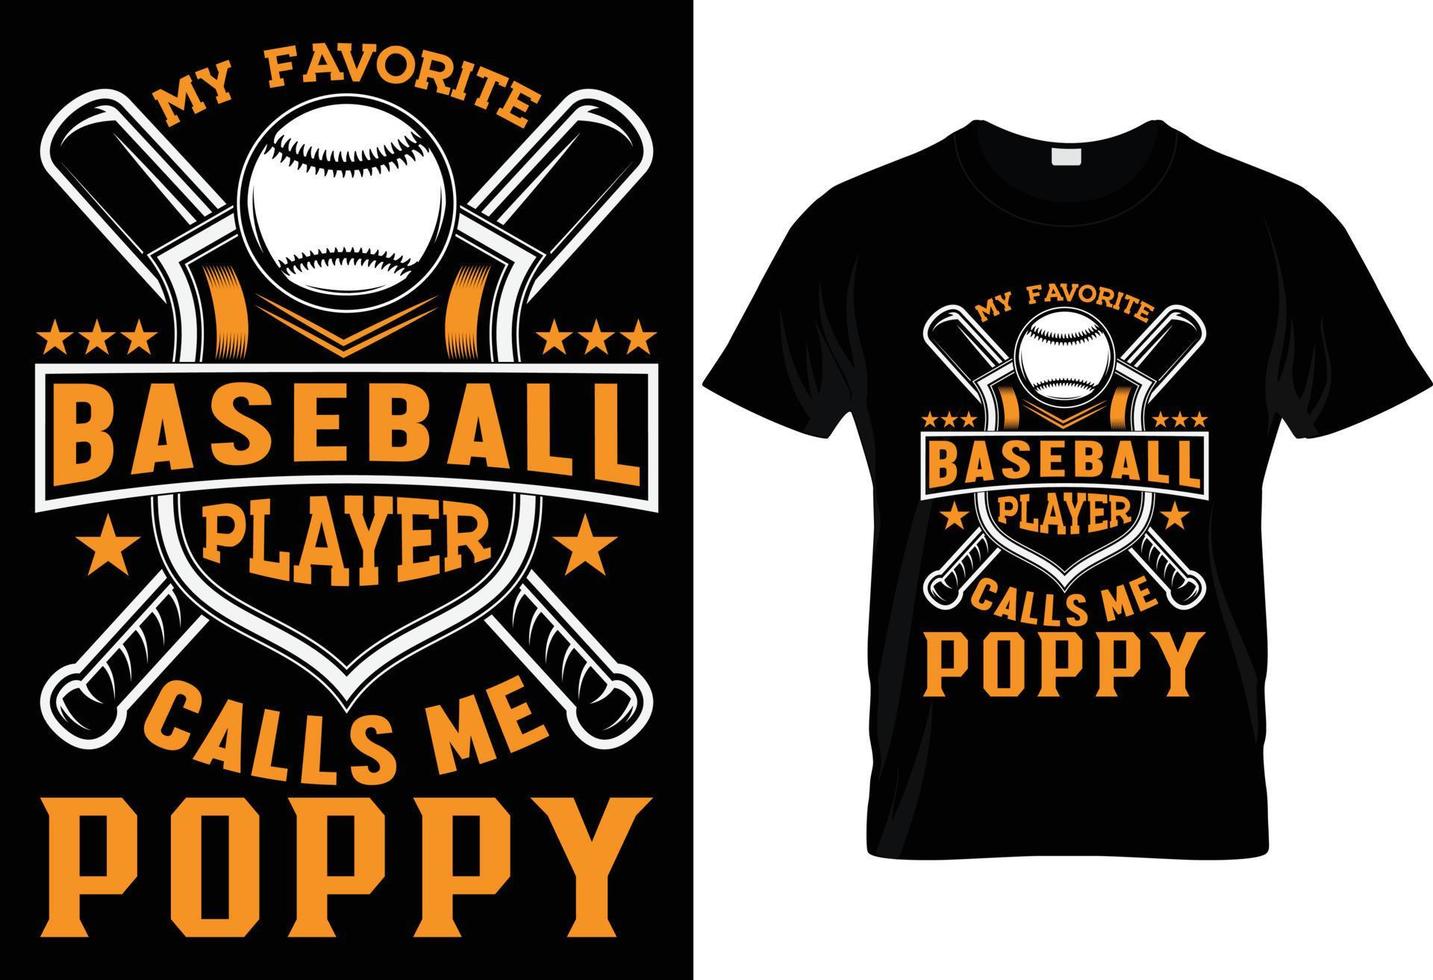 Baseball t-shirt design, baseball t-shirt design tamplate vector